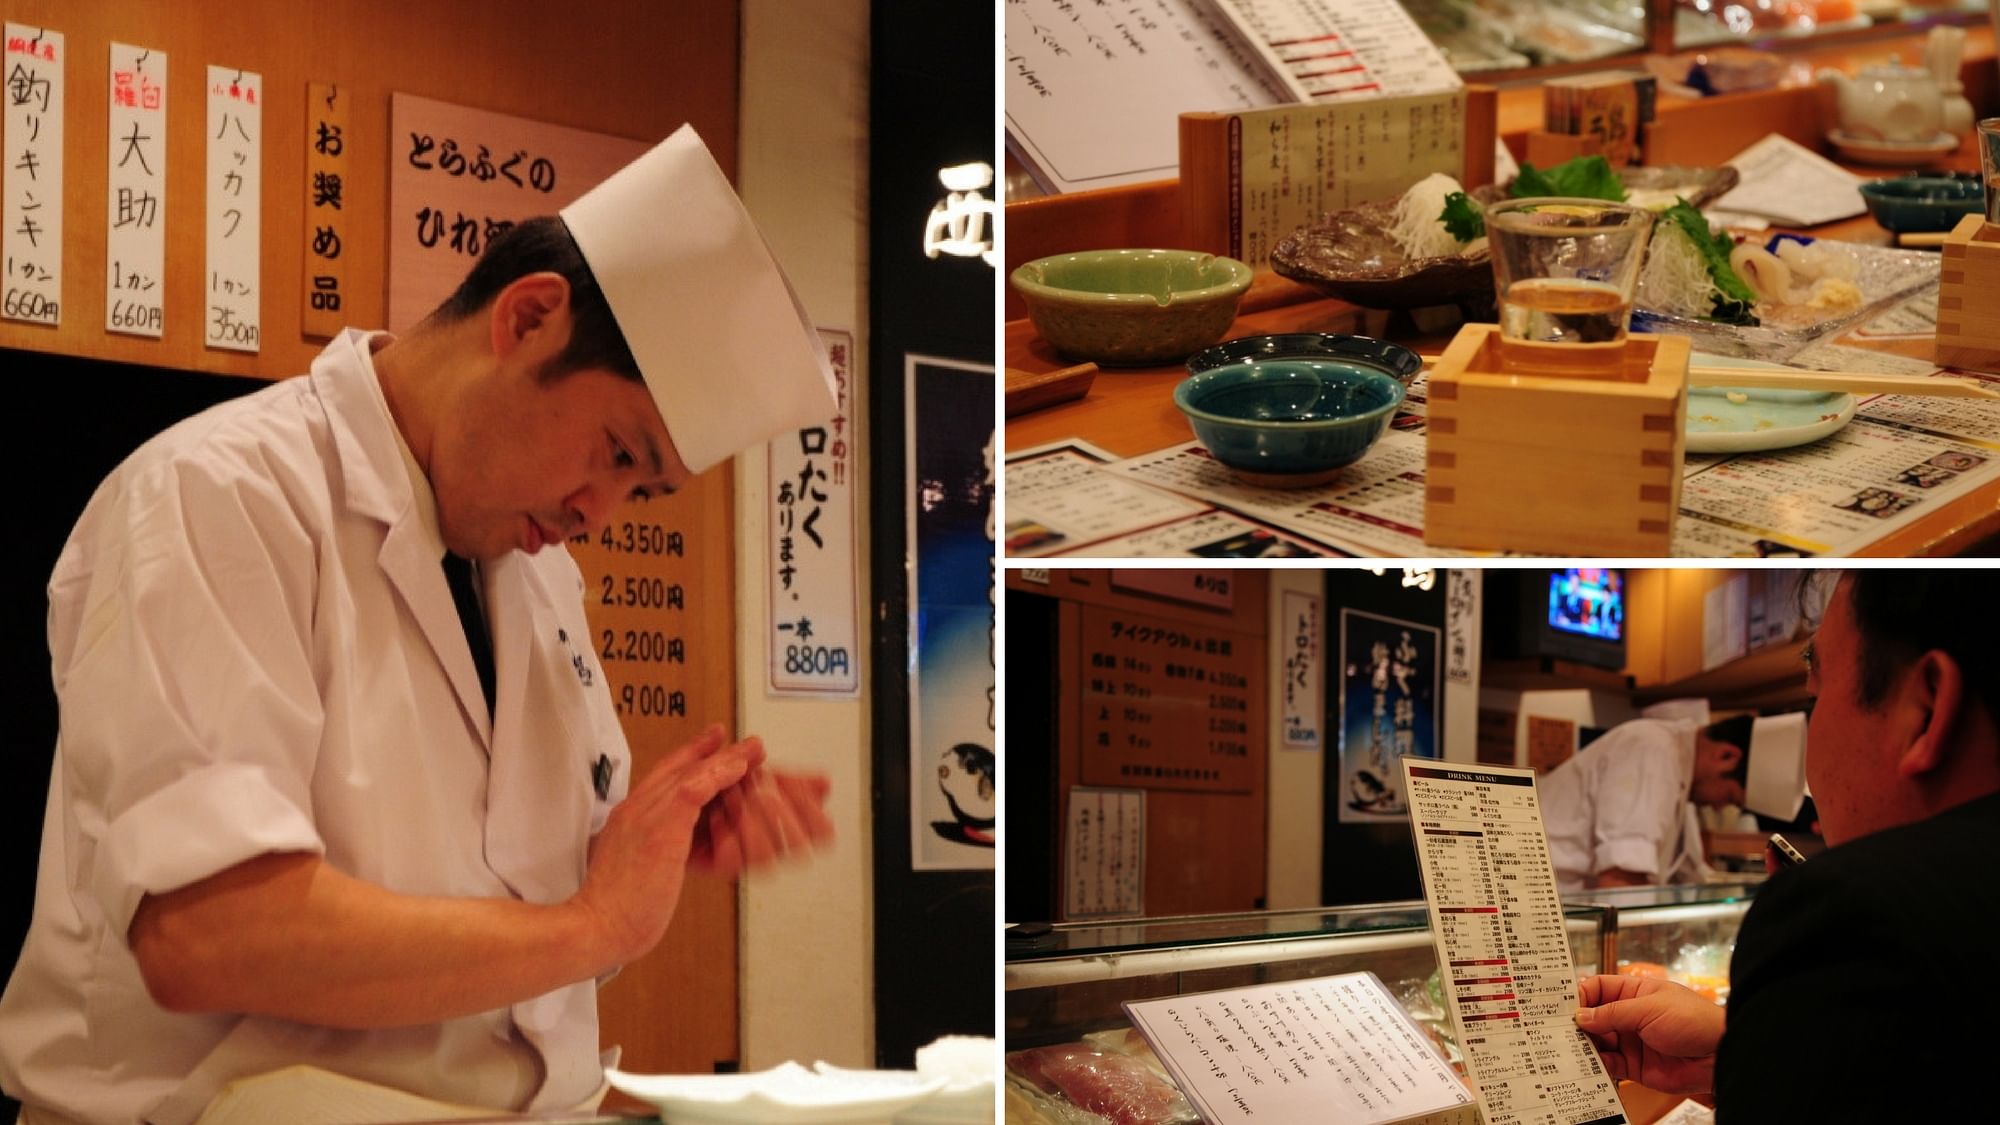 When I watched the taisho prepare sushi for me, he had made me pause and savour the moment.